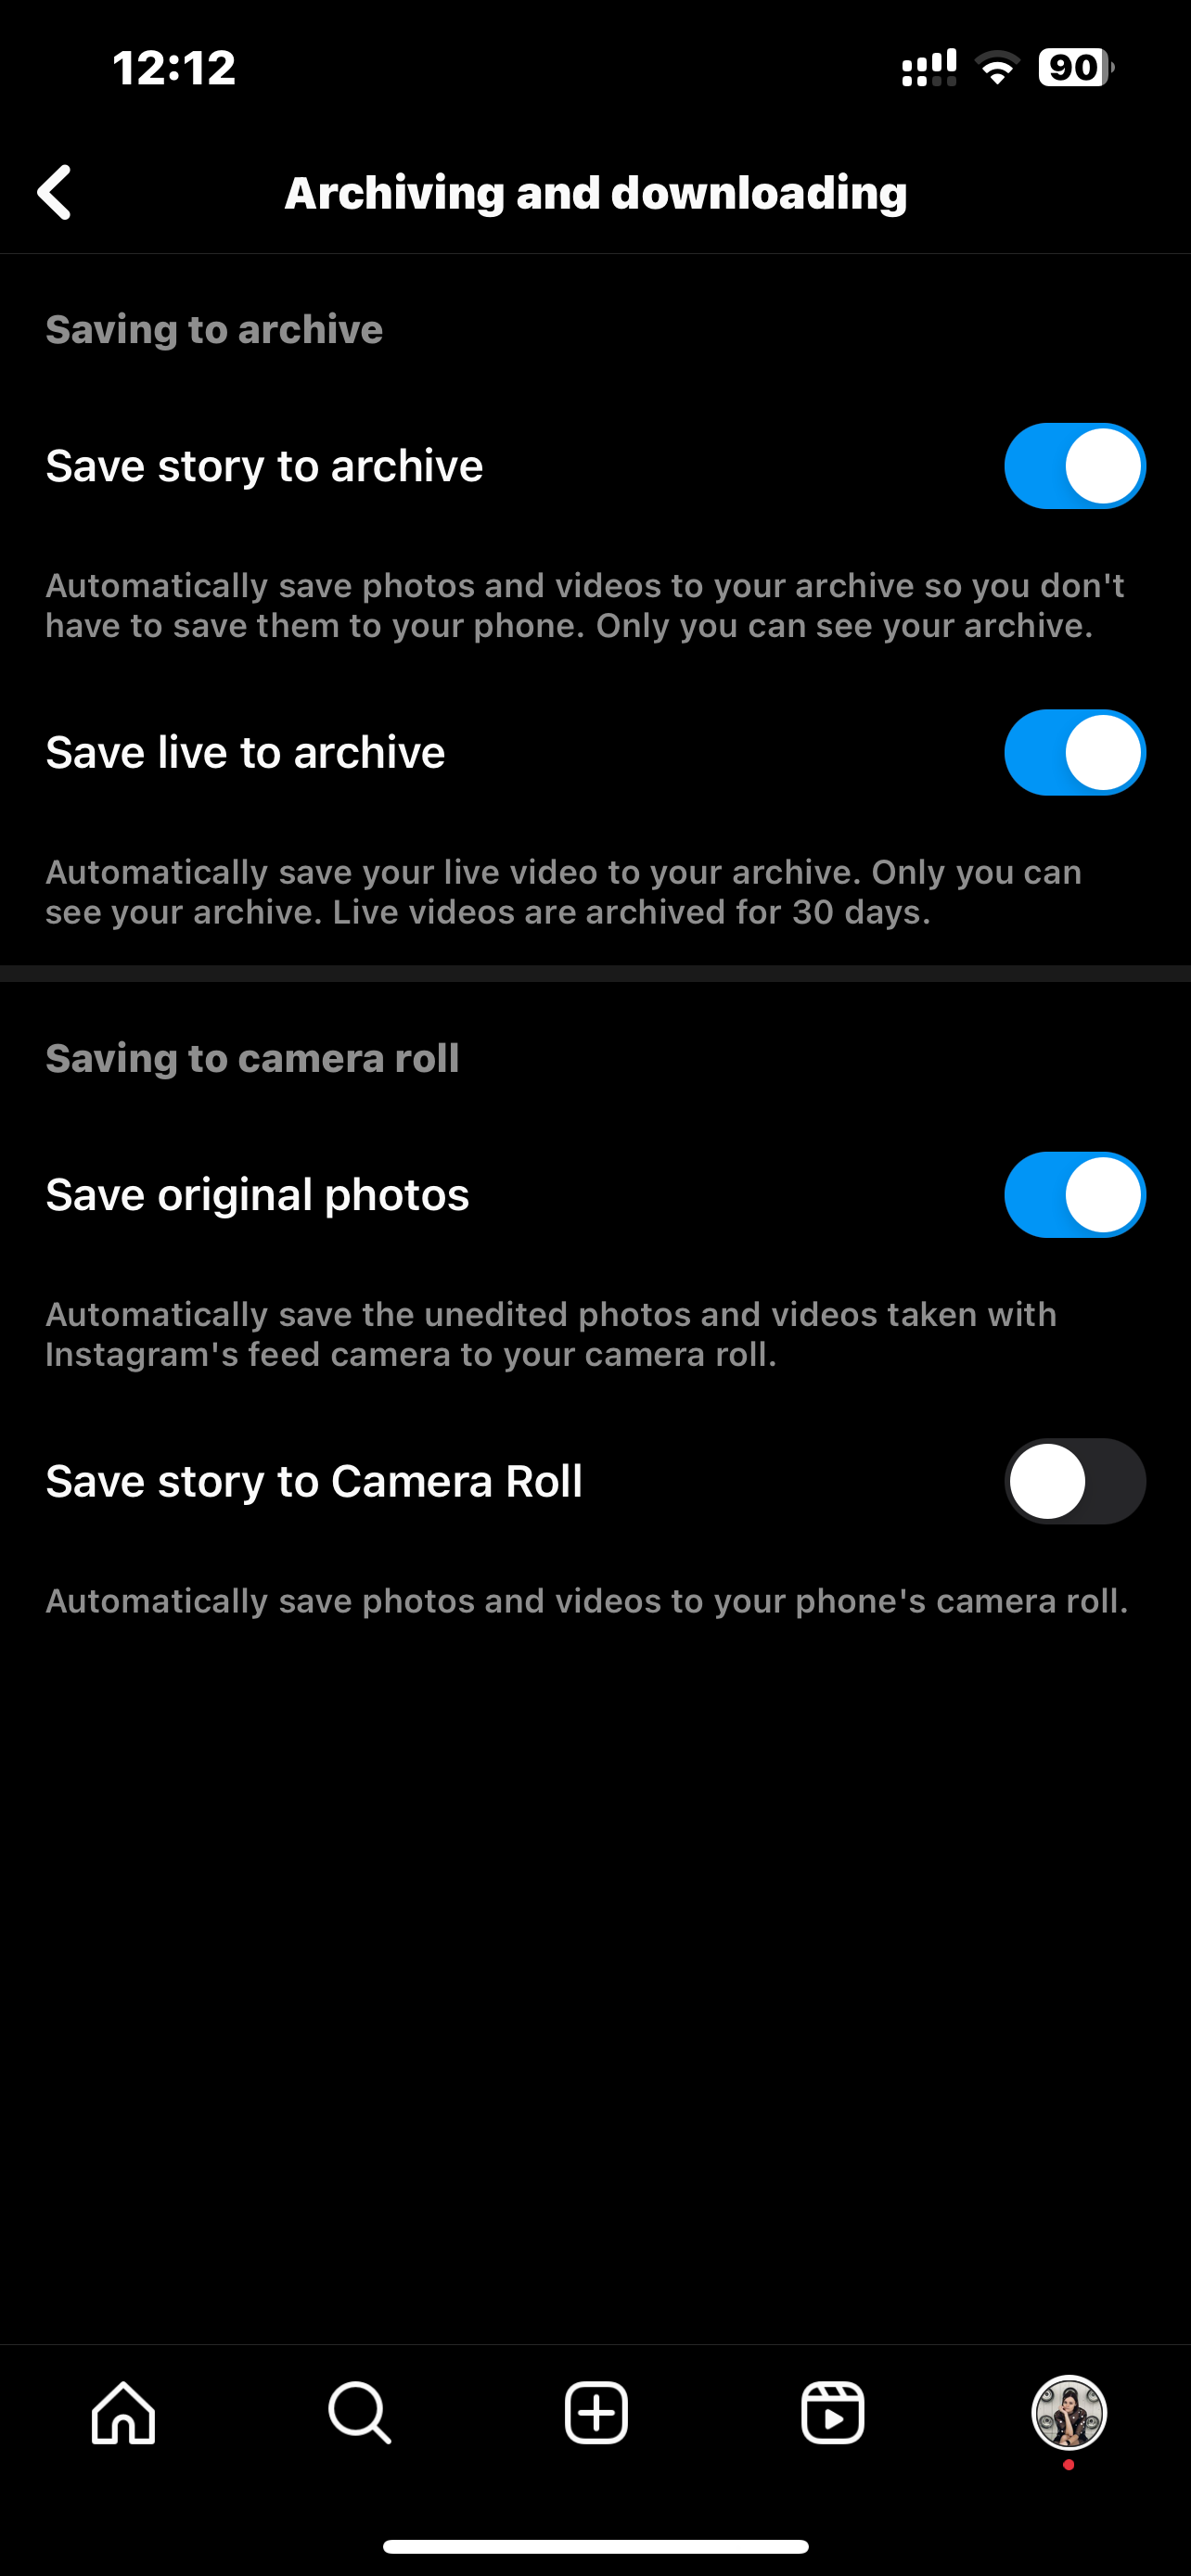 How to Download Instagram Images to an iPhone - step 2